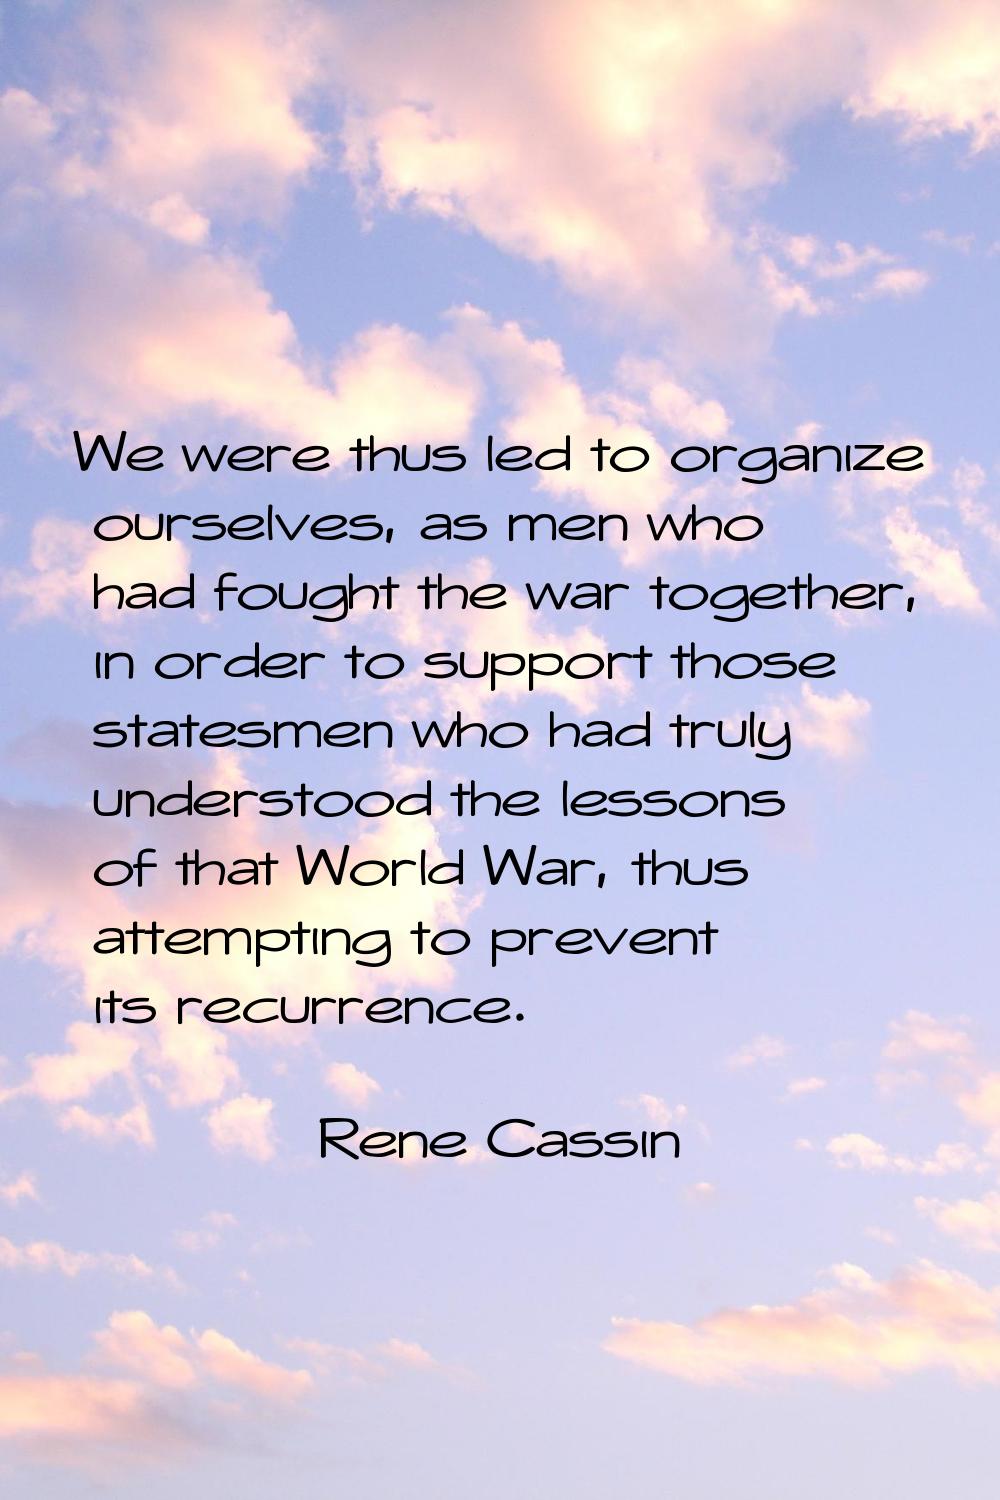 We were thus led to organize ourselves, as men who had fought the war together, in order to support